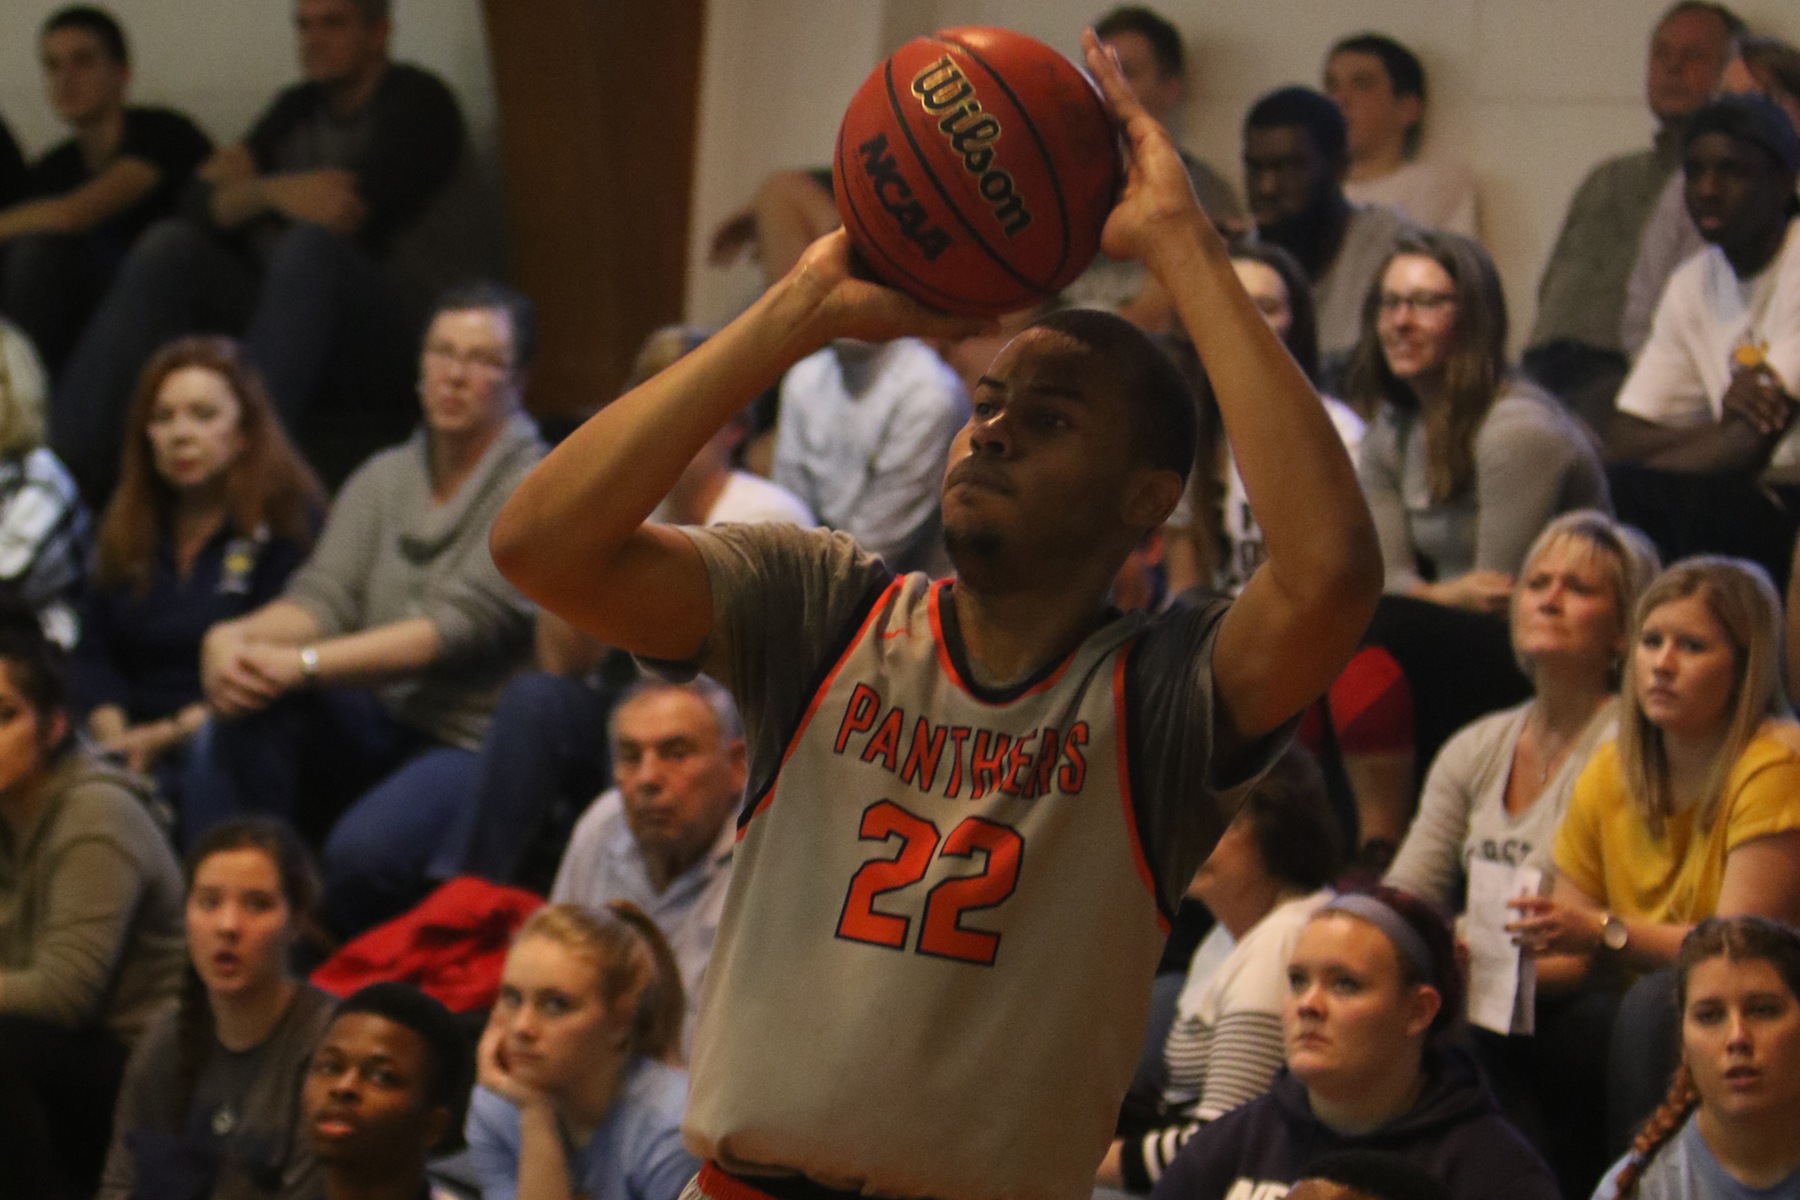 Men's basketball tripped up by Webster